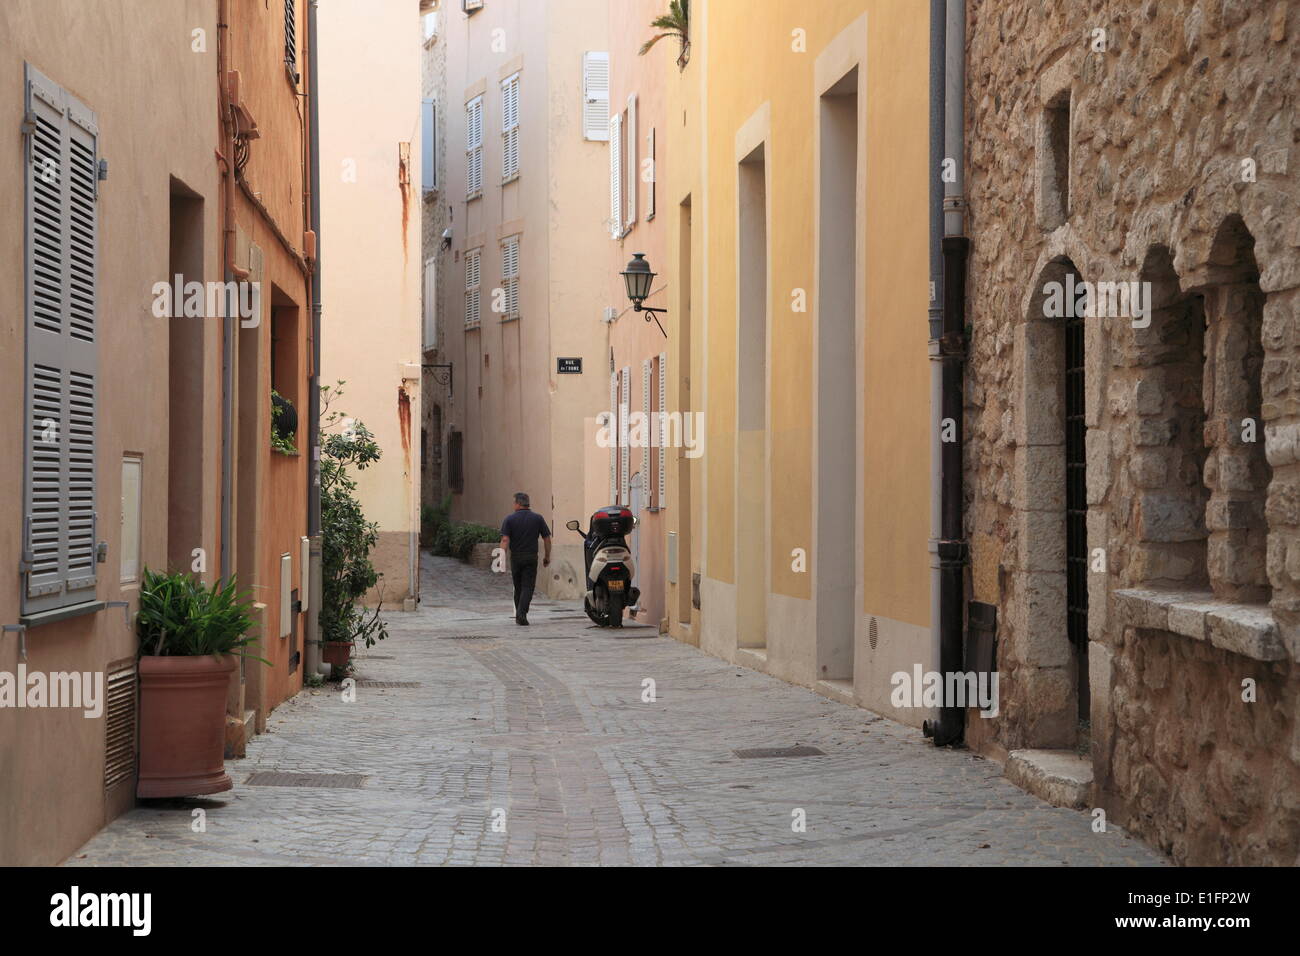 Old Town, Vieil Antibes, Antibes, Alpes-Maritimes, Cote d'Azur, French Riviera, Provence, France, Europe Stock Photo